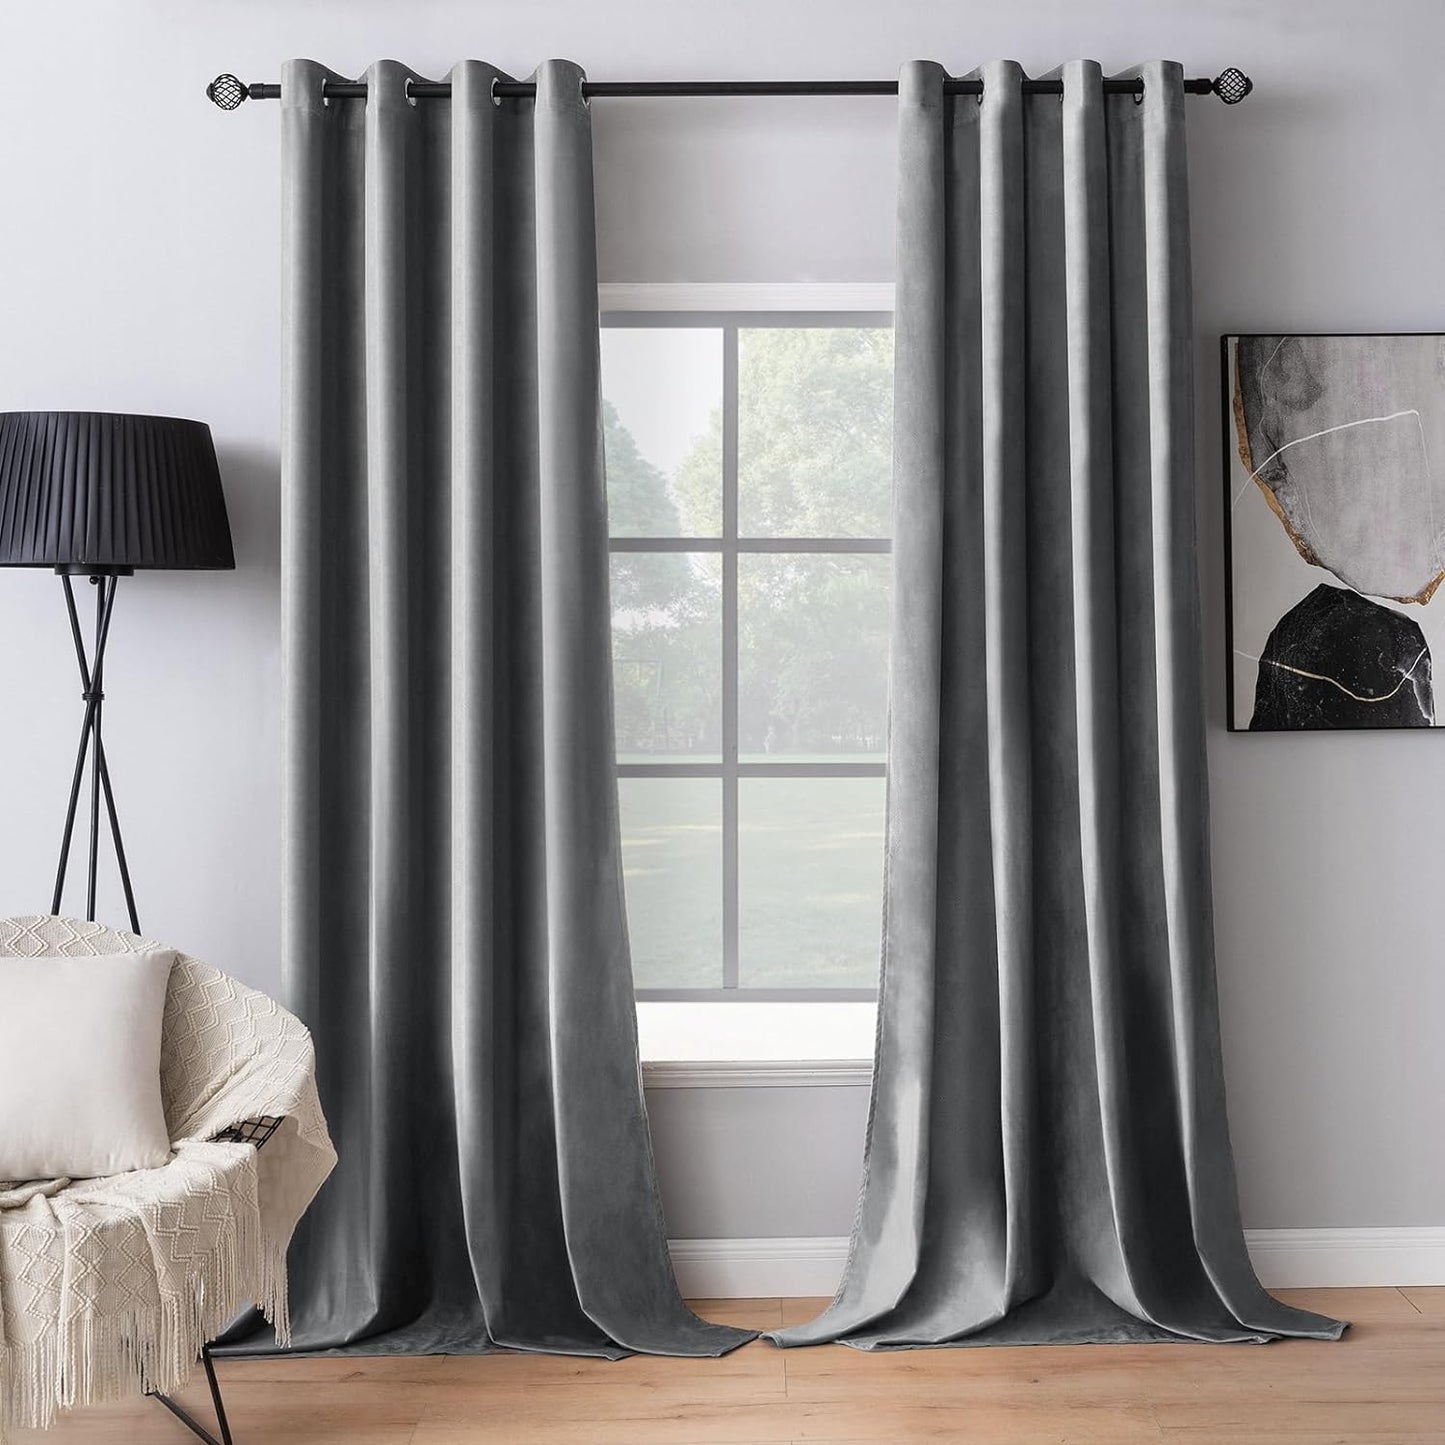 MIULEE Velvet Curtains Olive Green Elegant Grommet Curtains Thermal Insulated Soundproof Room Darkening Curtains/Drapes for Classical Living Room Bedroom Decor 52 X 84 Inch Set of 2  MIULEE Grey W52 X L96 